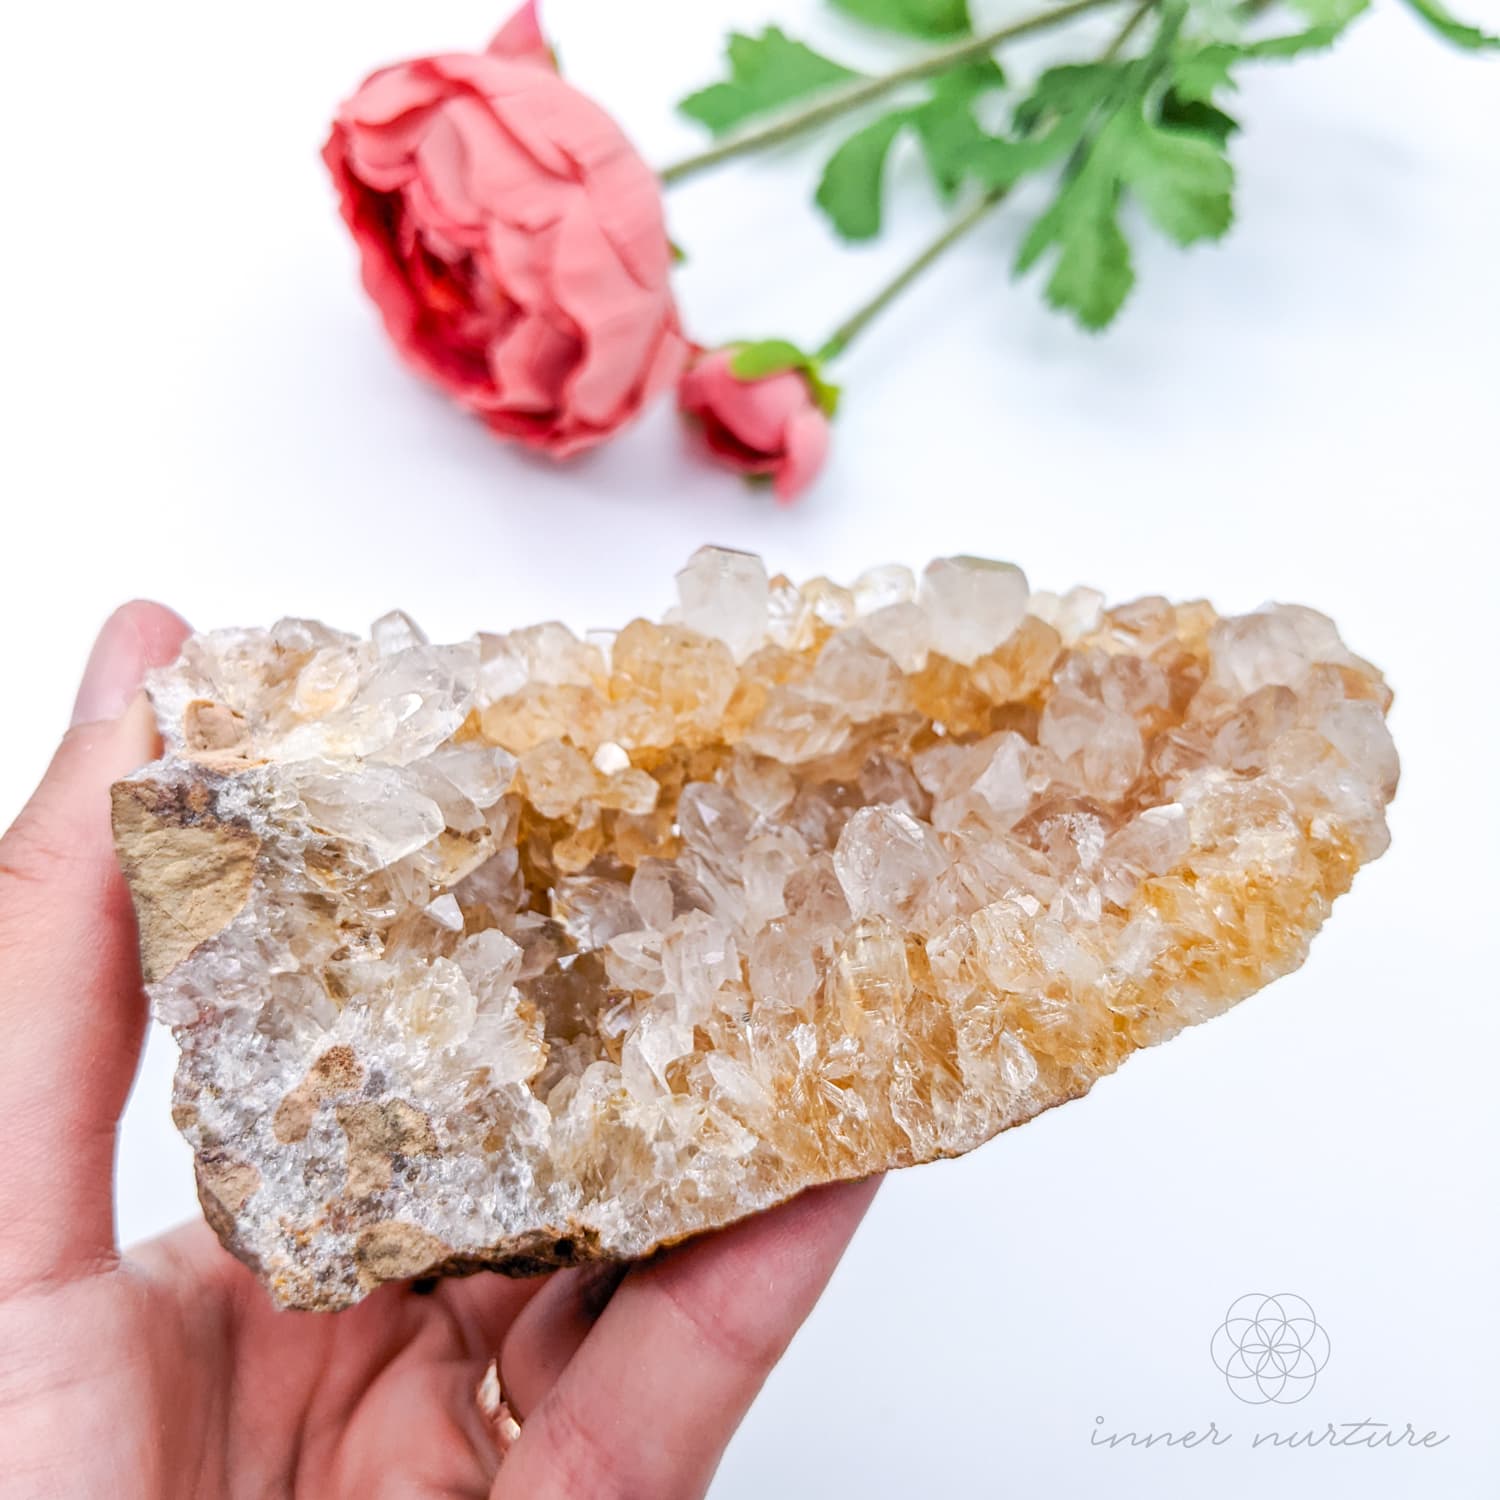 Clear Quartz Cluster With Inclusions - #12 | Crystal Shop Australia - Inner Nurture